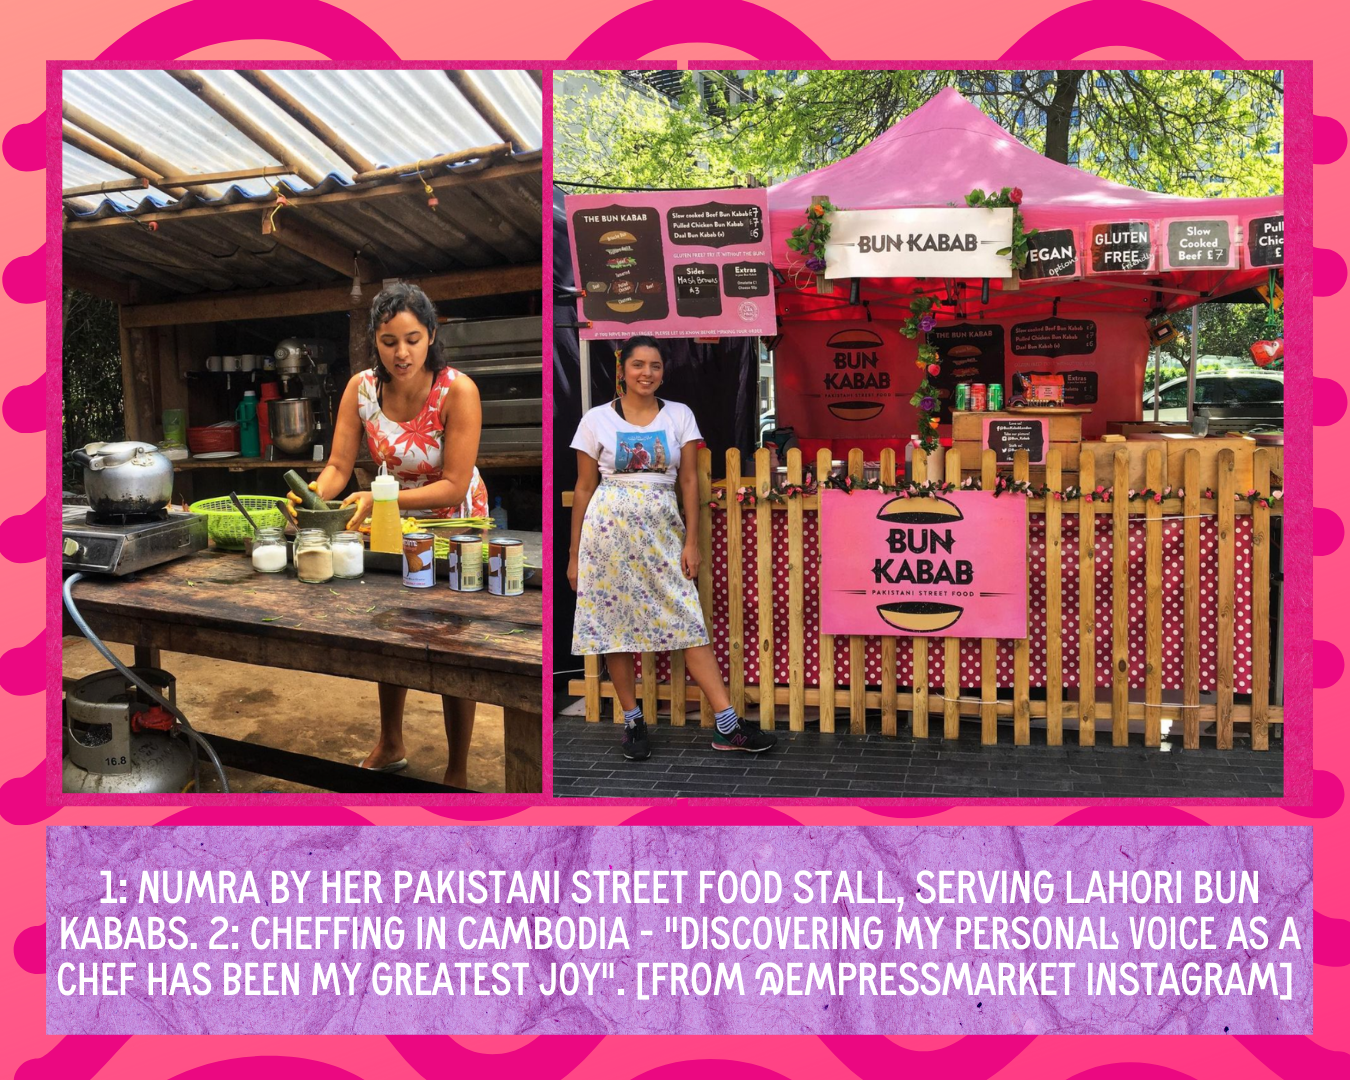 Numra by her Pakistani street food stall; Cheffing in Cambodia